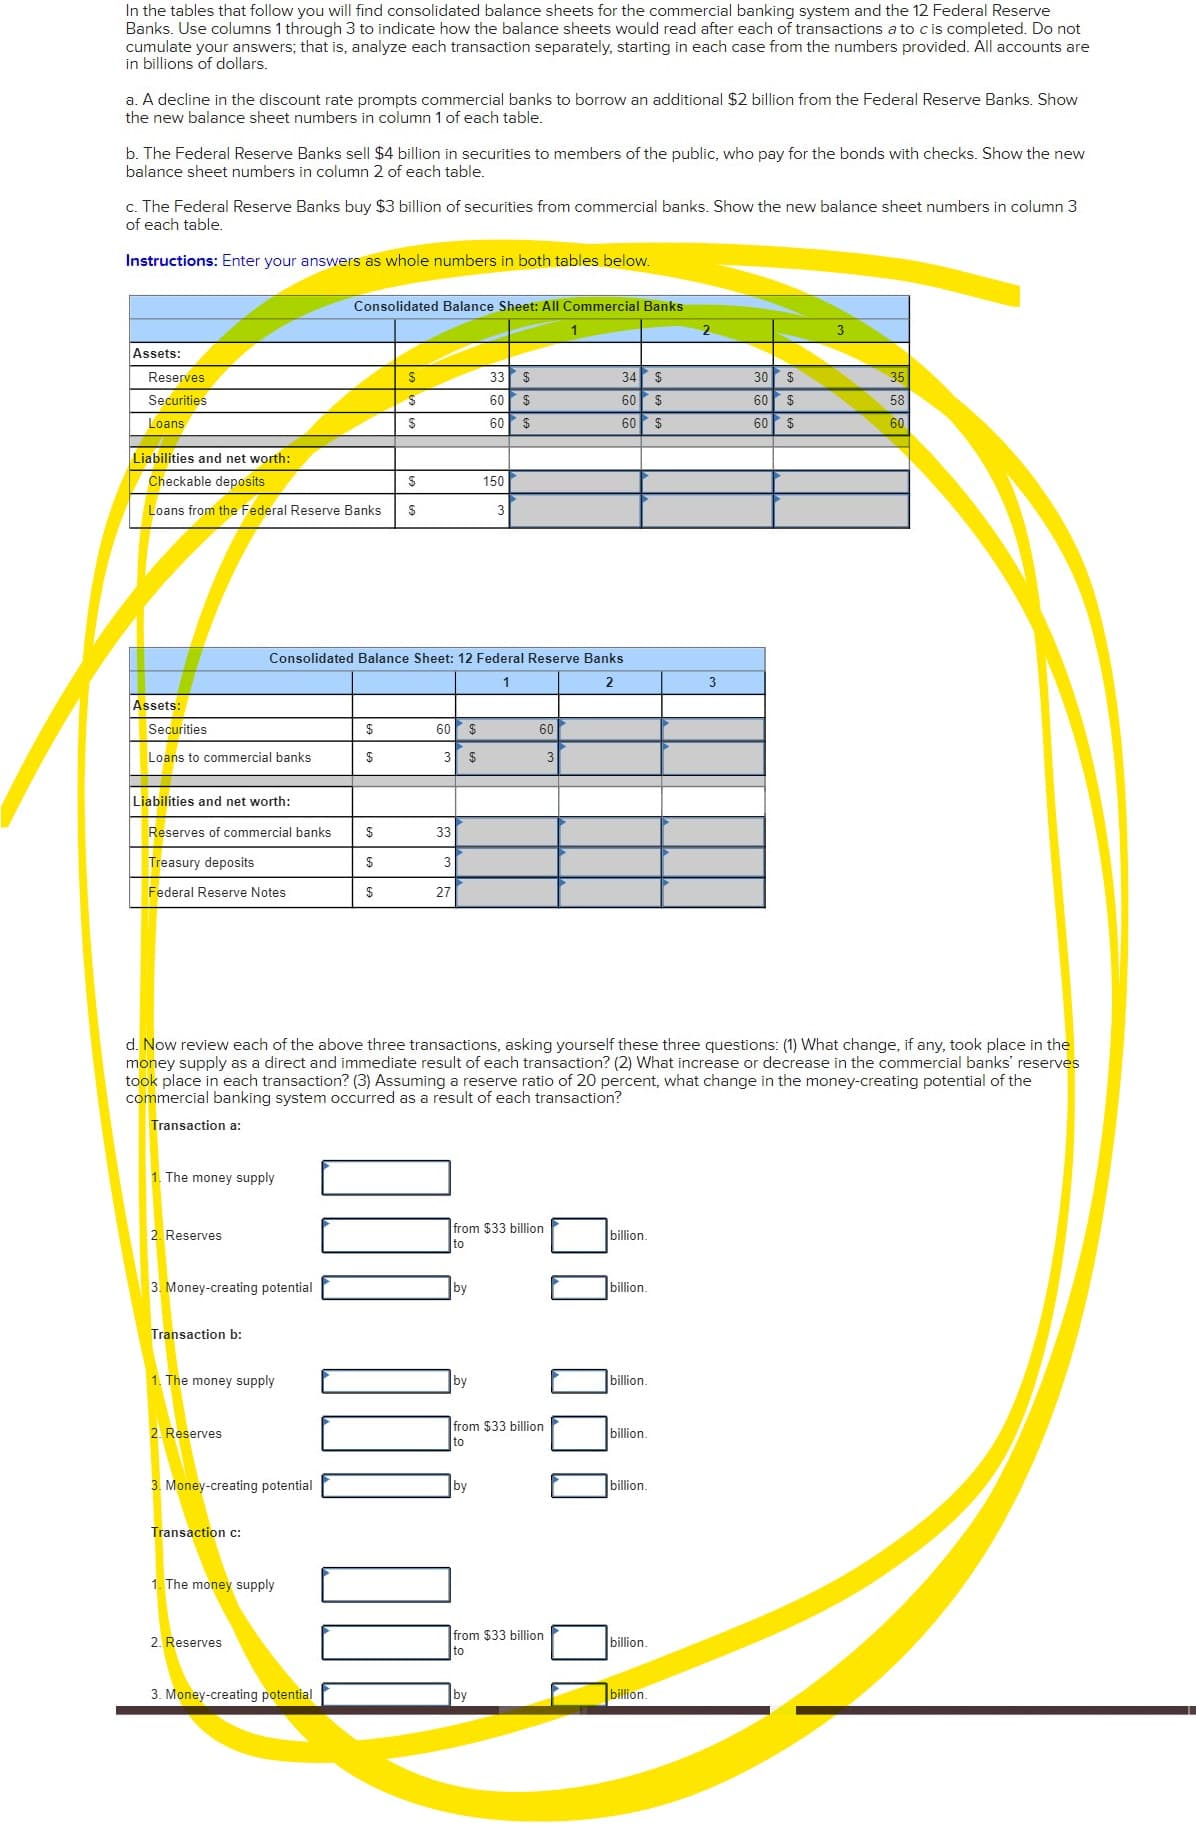 In the tables that follow you will find consolidated balance sheets for the commercial banking system and the 12 Federal Reserve
Banks. Use columns 1 through 3 to indicate how the balance sheets would read after each of transactions a to cis completed. Do not
cumulate your answers; that is, analyze each transaction separately, starting in each case from the numbers provided. All accounts are
in billions of dollars.
a. A decline in the discount rate prompts commercial banks to borrow an additional $2 billion from the Federal Reserve Banks. Show
the new balance sheet numbers in column 1 of each table.
b. The Federal Reserve Banks sell $4 billion in securities to members of the public, who pay for the bonds with checks. Show the new
balance sheet numbers in column 2 of each table.
c. The Federal Reserve Banks buy $3 billion of securities from commercial banks. Show the new balance sheet numbers in column 3
of each table.
Instructions: Enter your answers as whole numbers in both tables below.
Consolidated Balance Sheet: All Commercial Banks
2
Assets:
Reserves
33
$
34
2$
30 $
35
Securities
60
$
60
2$
60
$
58
Loans
60 $
60
%2$
60
2$
60
Liabilities and net worth:
Checkable deposits
150
Loans from the Federal Reserve Banks
Consolidated Balance Sheet: 12 Federal Reserve Banks
1
2
3
Assets:
Securities
$
60 $
60
Loans to commercial banks
$
3
2$
3
Liabilities and net worth:
Reserves of commercial banks
$
33
Treasury deposits
2$
Federal Reserve Notes
$
27
d. Now review each of the above three transactions, asking yourself these three questions: (1) What change, if any, took place in the
money supply as a direct and immediate result of each transaction? (2) What increase or decrease in the commercial banks' reserves
took place in each transaction? (3) Assuming a reserve ratio of 20 percent, what change in the money-creating potential of the
commercial banking system occurred as a result of each transaction?
Transaction a:
1. The money supply
from $33 billion
to
2. Reserves
billion.
3. Money-creating potential
by
billion.
Transaction b:
1. The money supply
by
billion.
from $33 billion
to
2. Reserves
billion.
3. Money-creating potential
by
billion.
Transaction c:
1. The money supply
2. Reserves
from $33 billion
billion.
to
3. Money-creating potential
by
billion.
